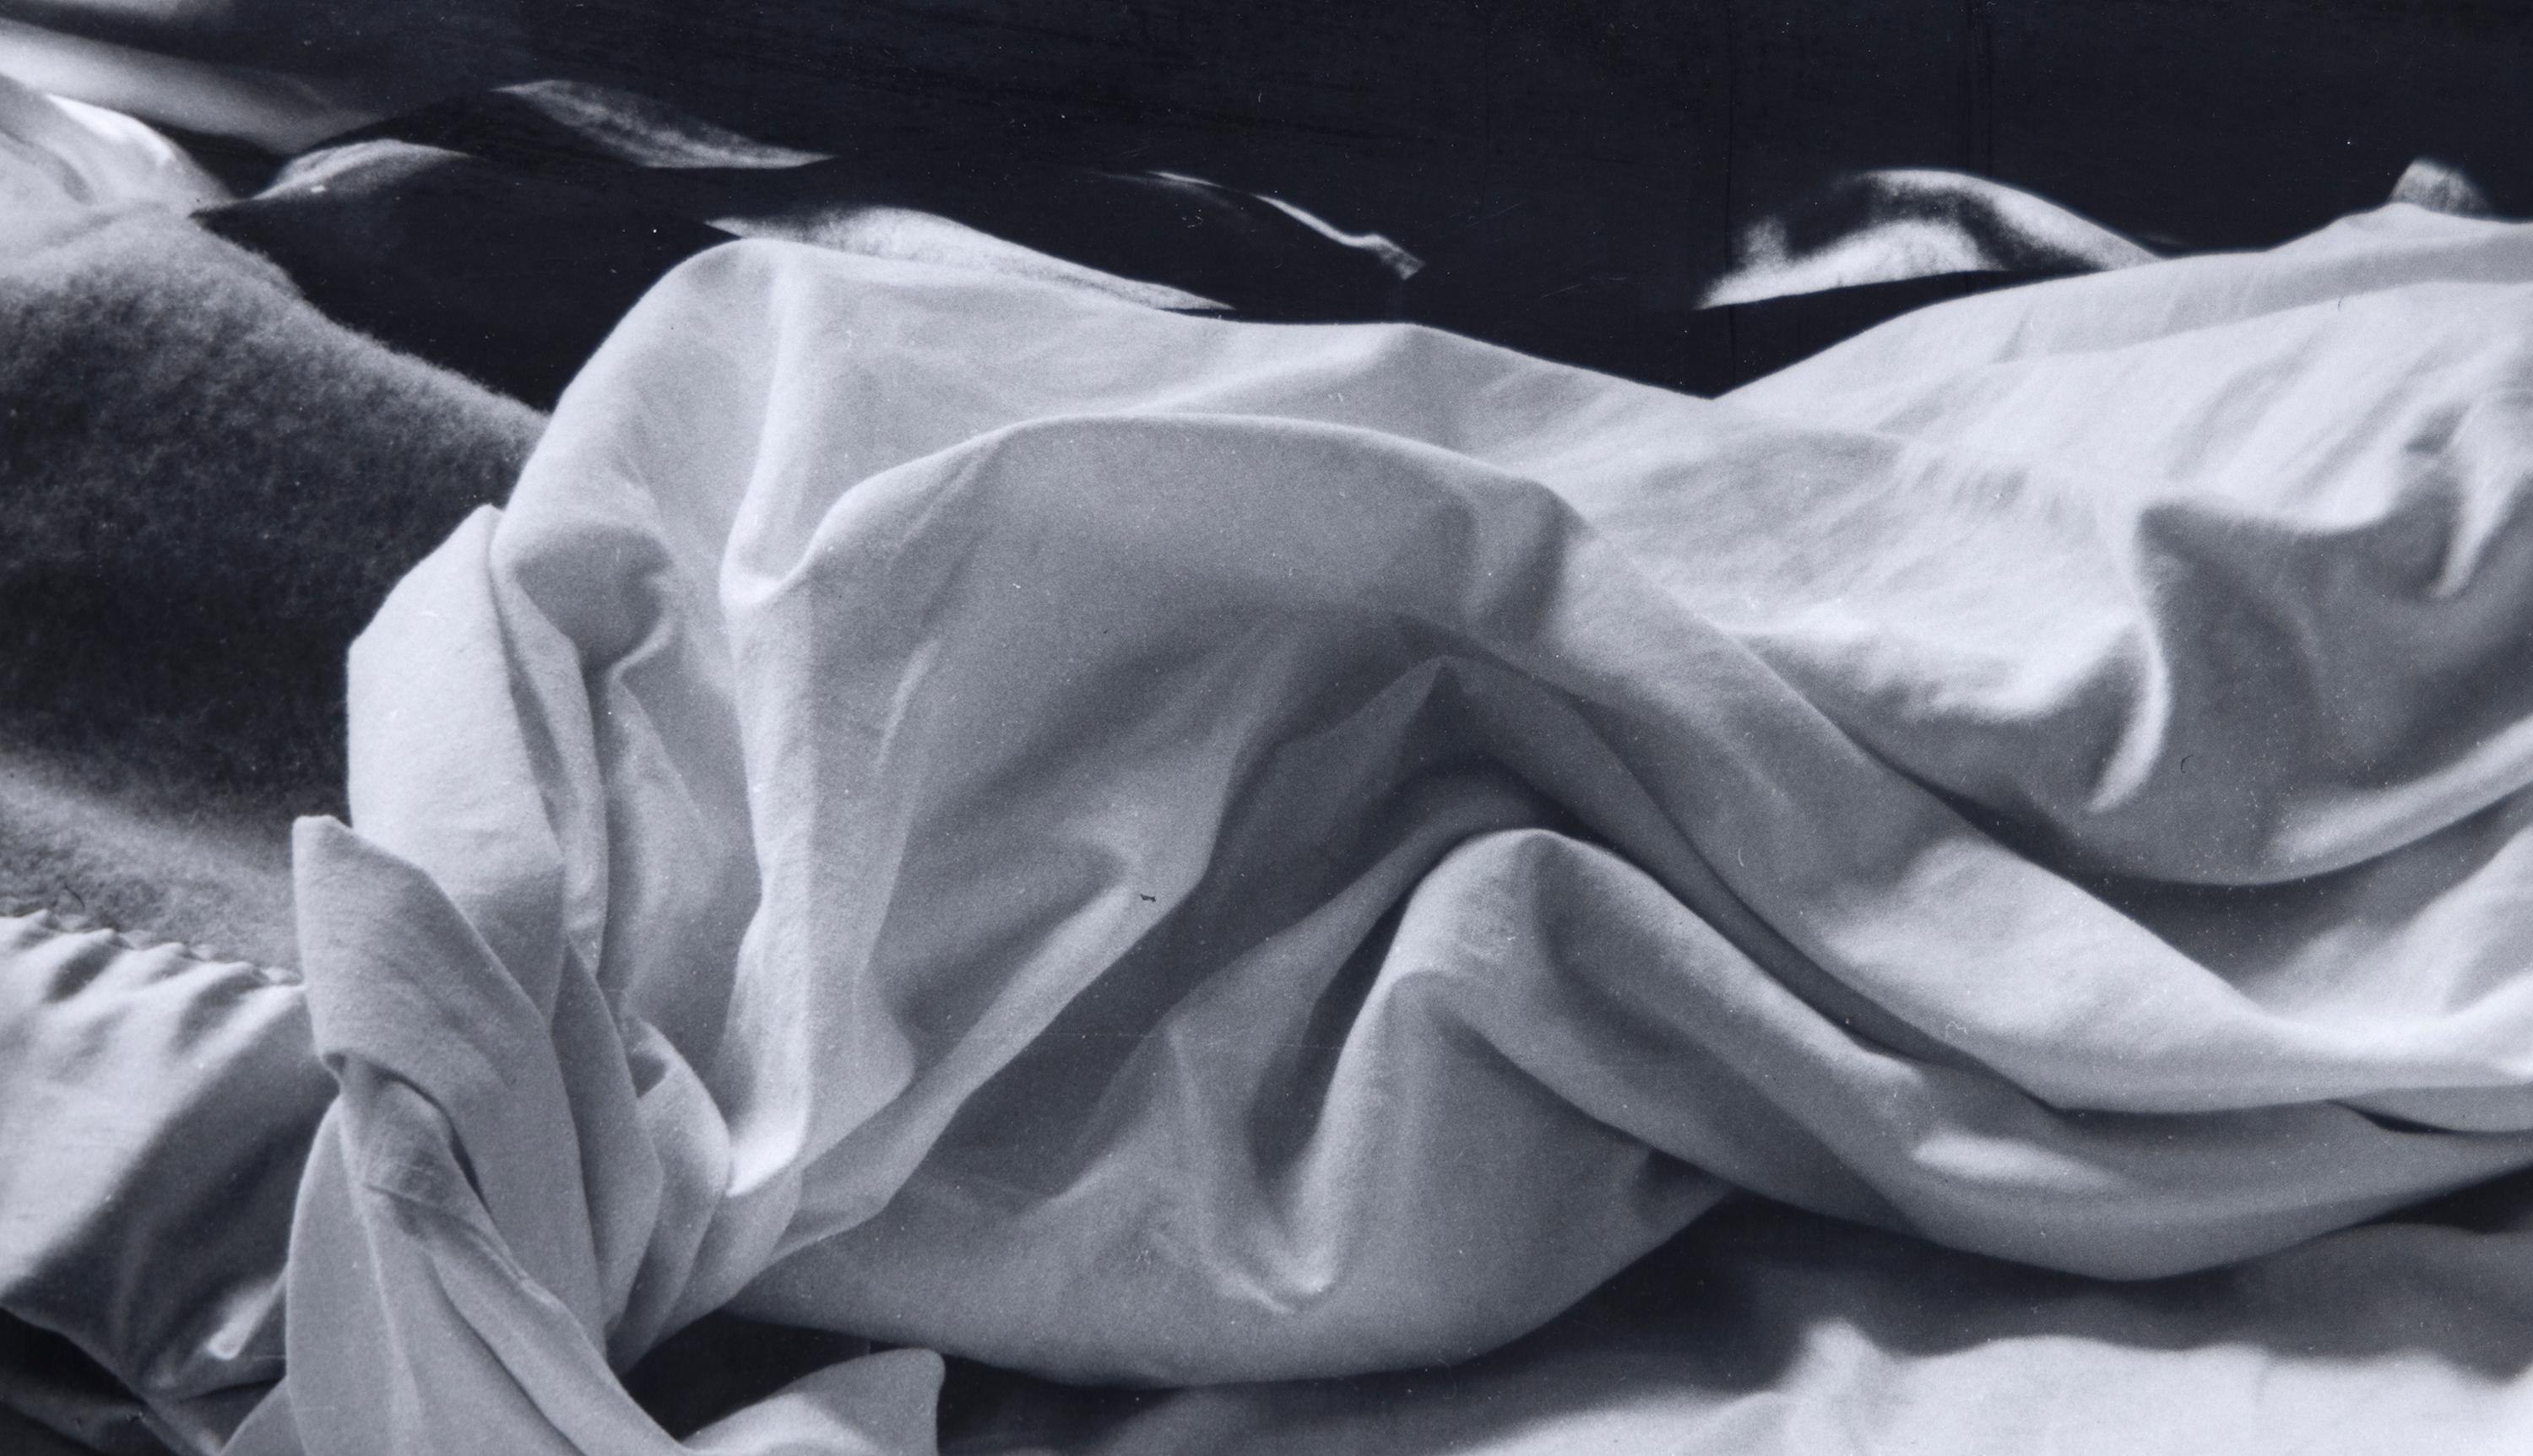 The Unmade Bed - Black Still-Life Photograph by Imogen Cunningham